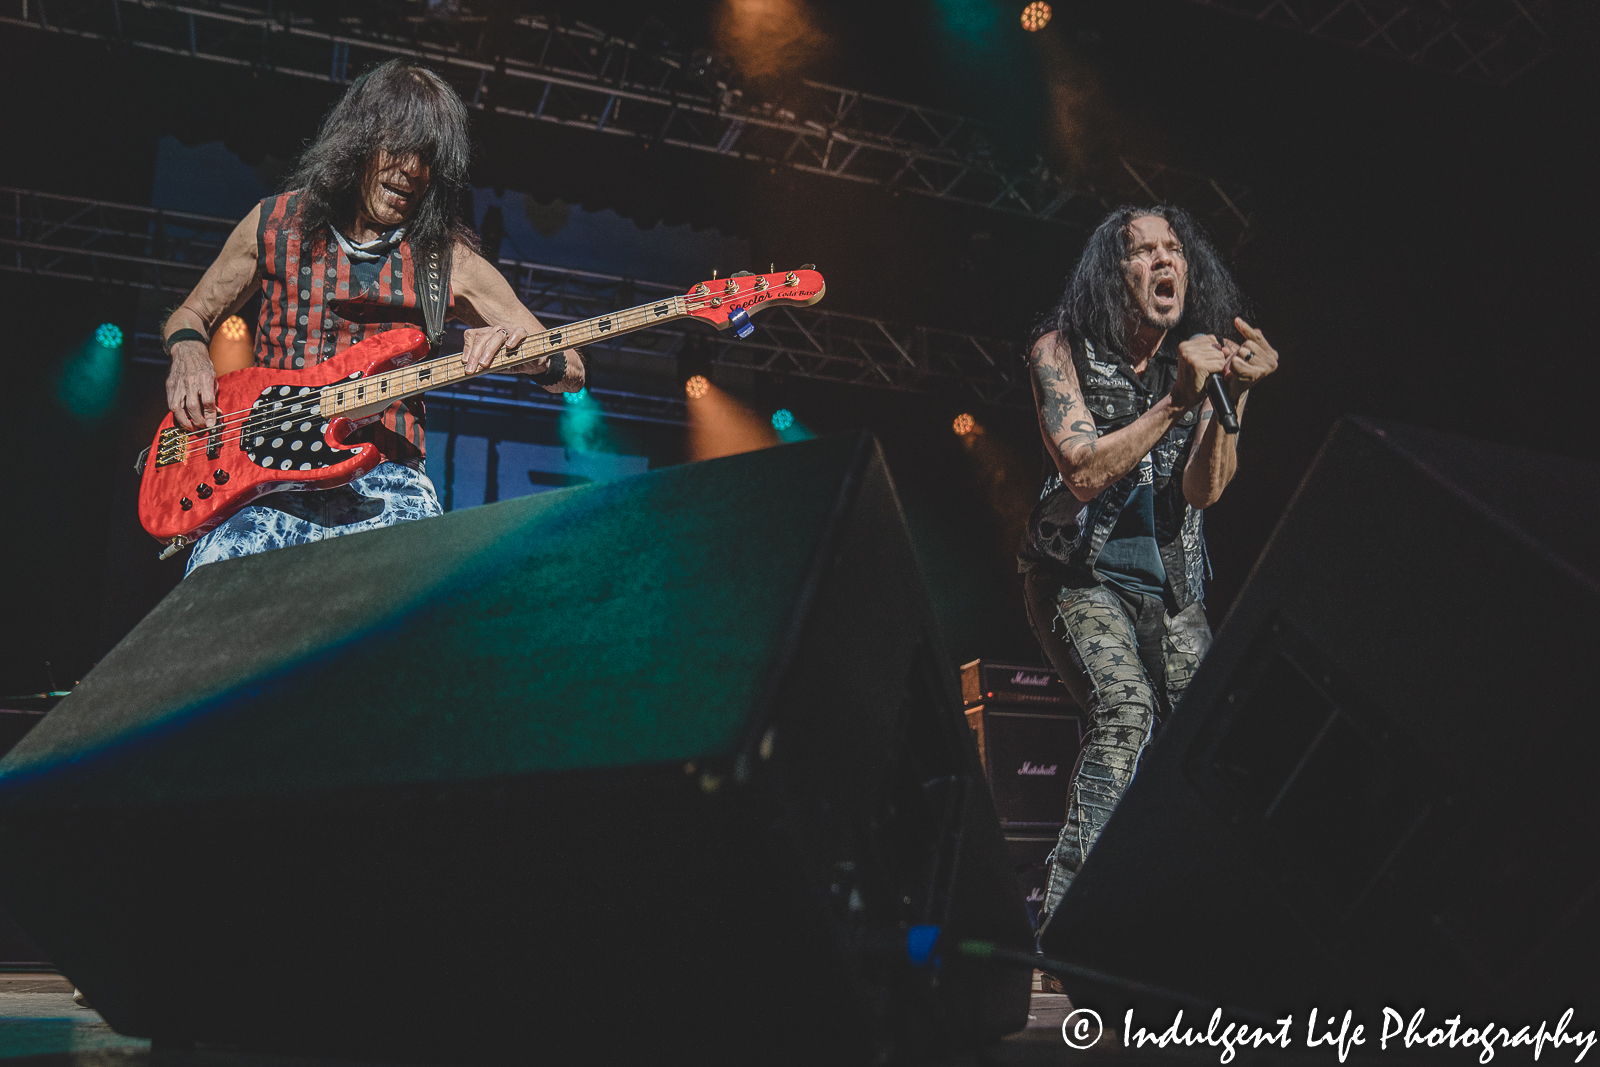 Quiet Riot bass player Rudy Sarzo and lead singer Jizzy Pearl performing live together at Ameristar Casino in Kansas City, MO on July 29, 2022.